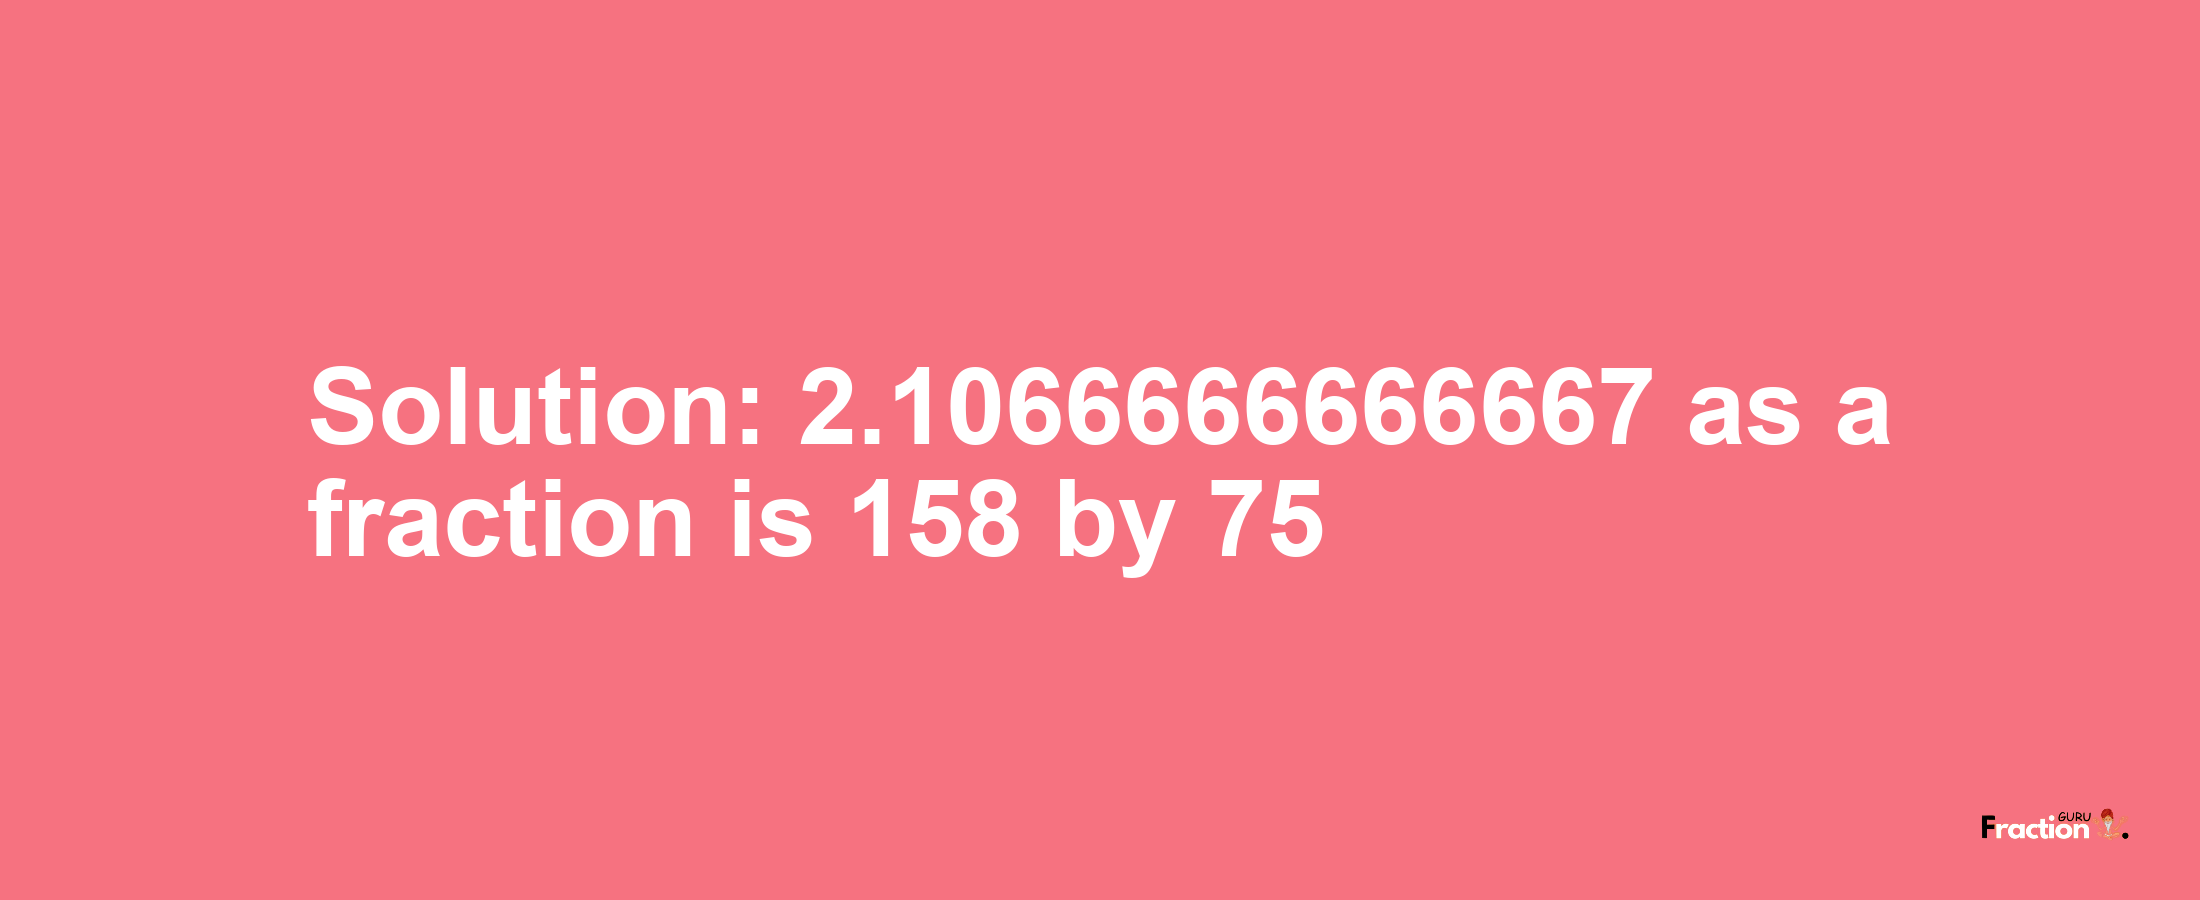 Solution:2.1066666666667 as a fraction is 158/75